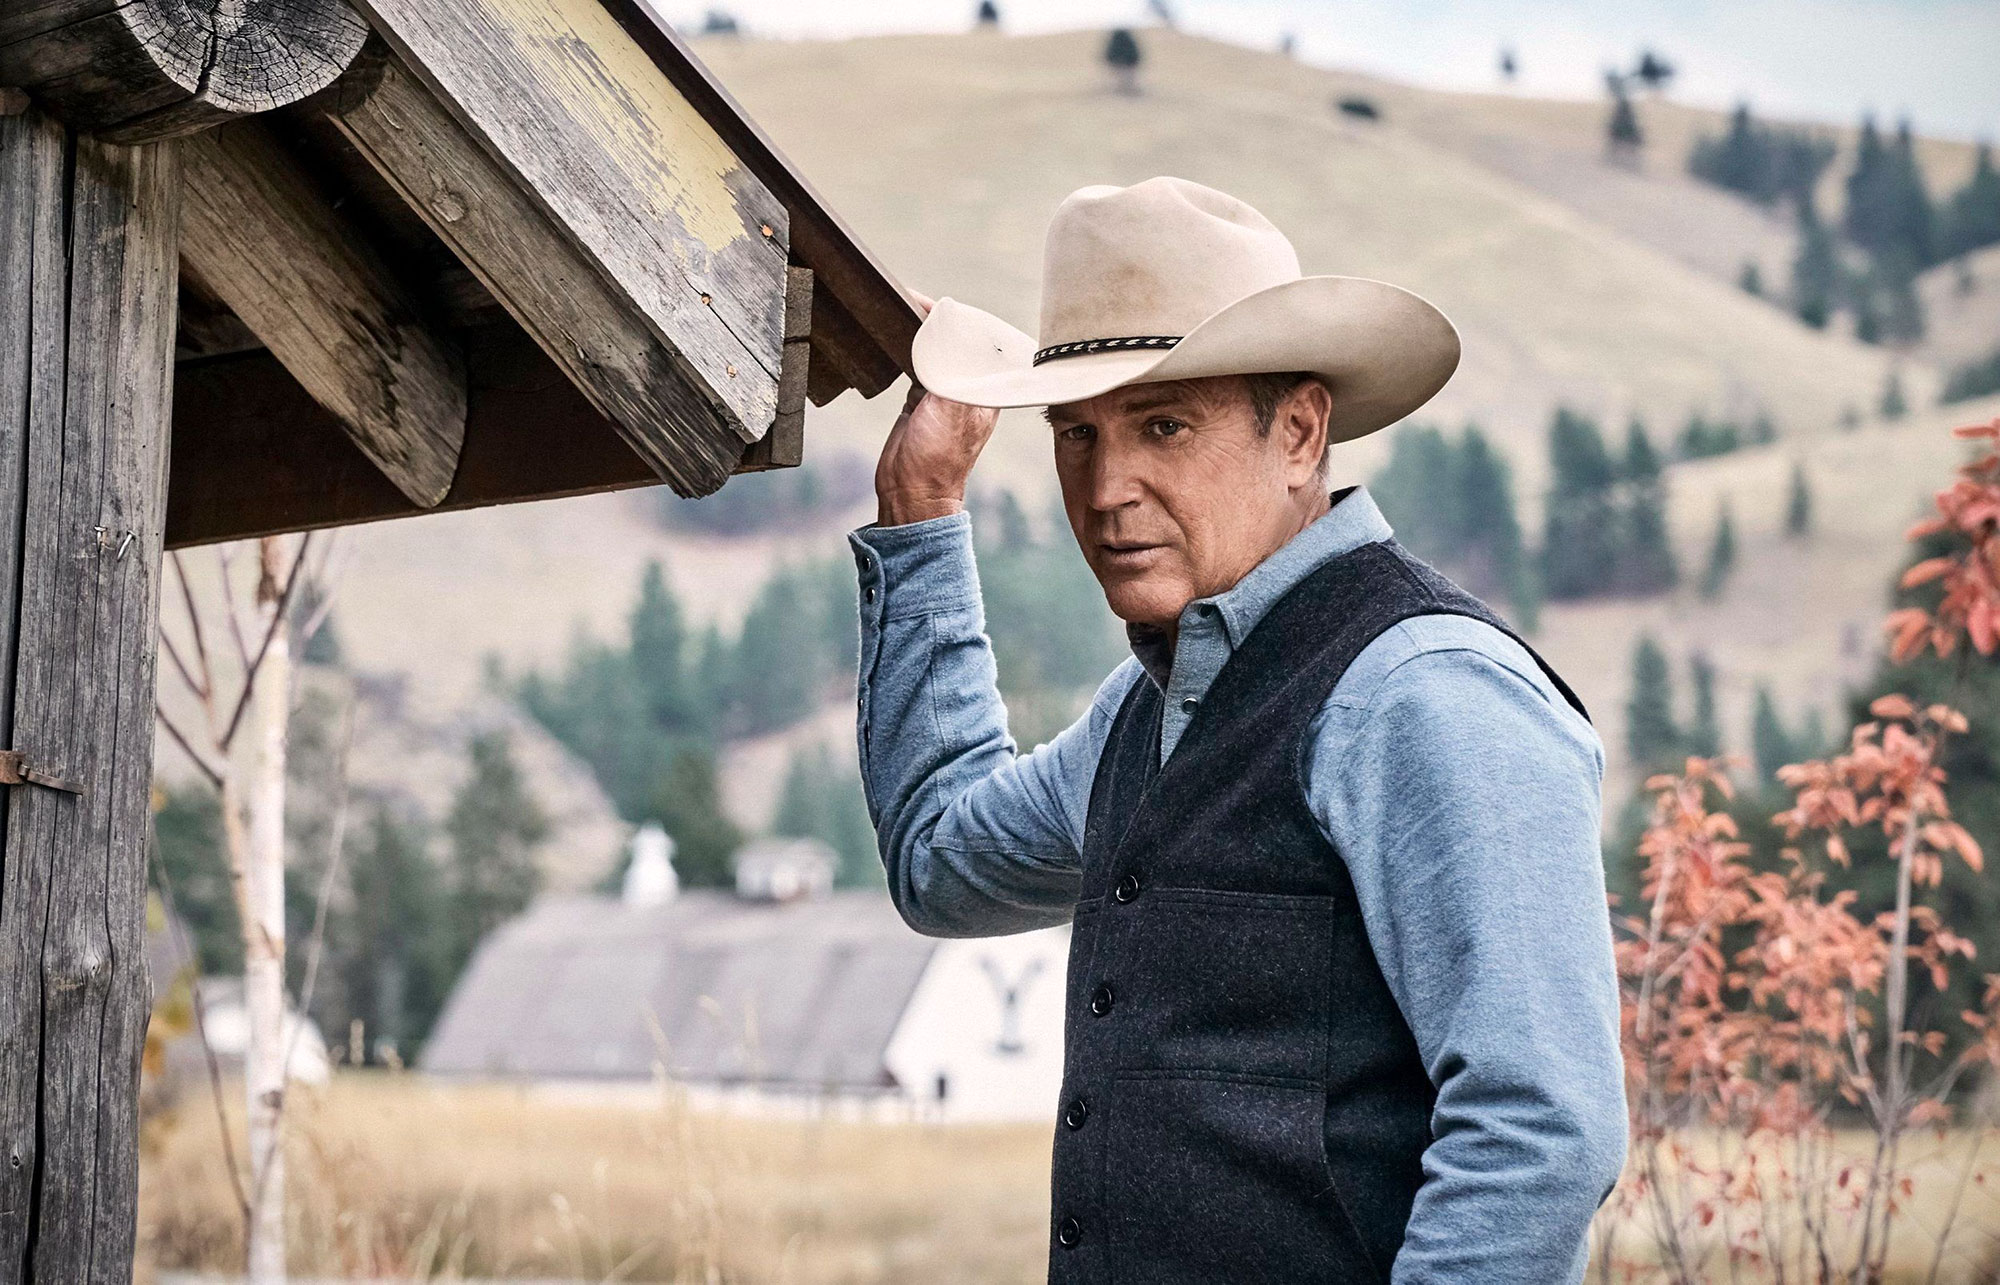 How To Watch Yellowstone Season 4 Premiere For Free